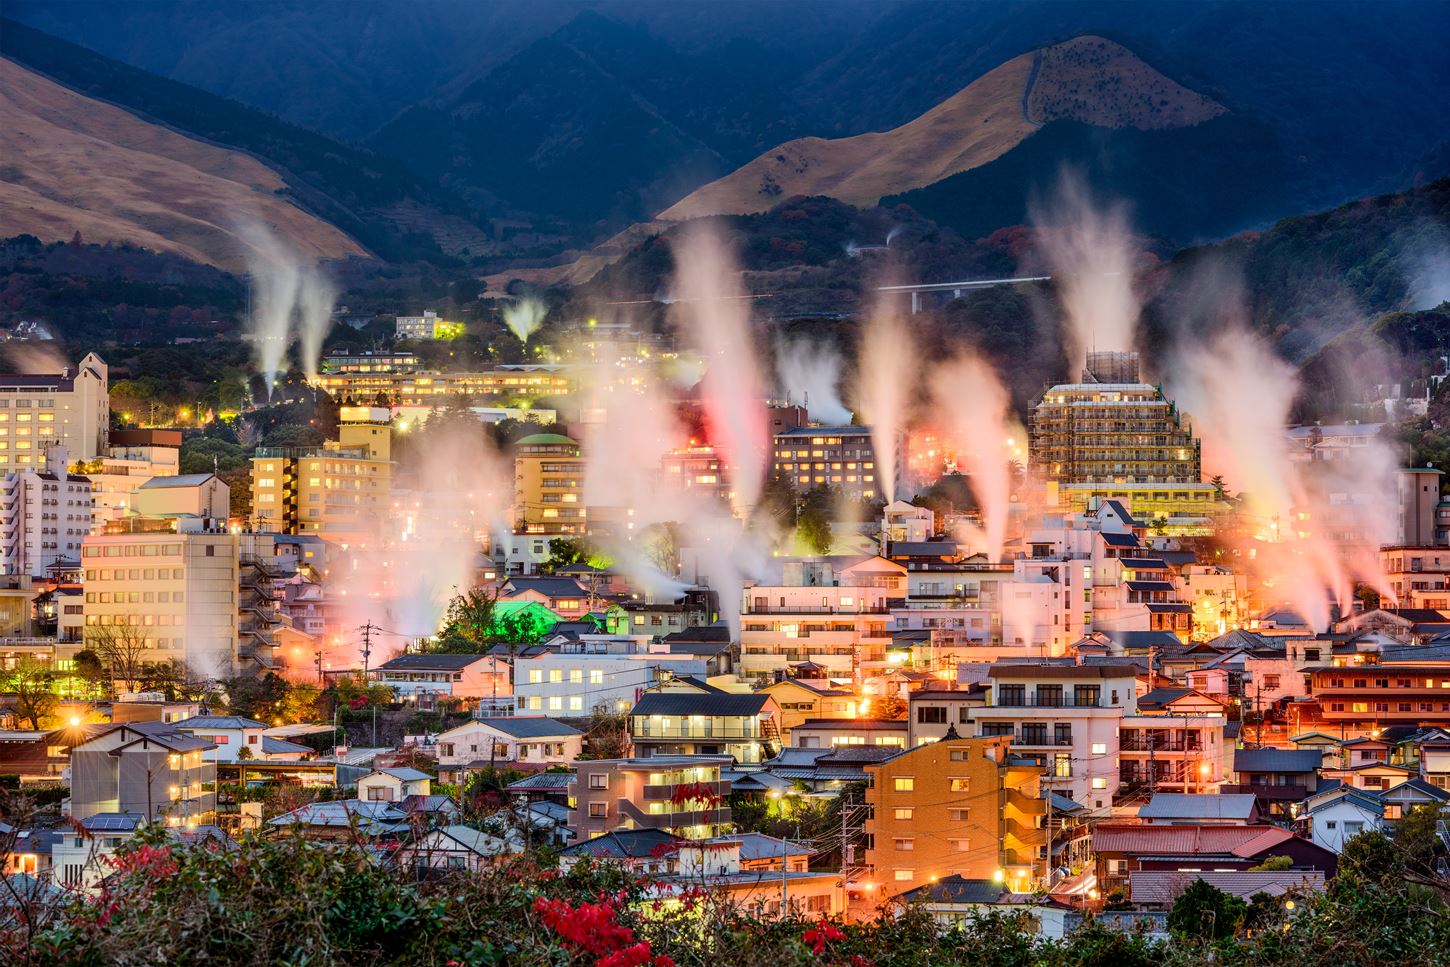 Hot spring steam rises from the entire city of Beppu, creating a fantastical world of illuminations, Beppu, Oita Prefecture, Japan = Shutterstock